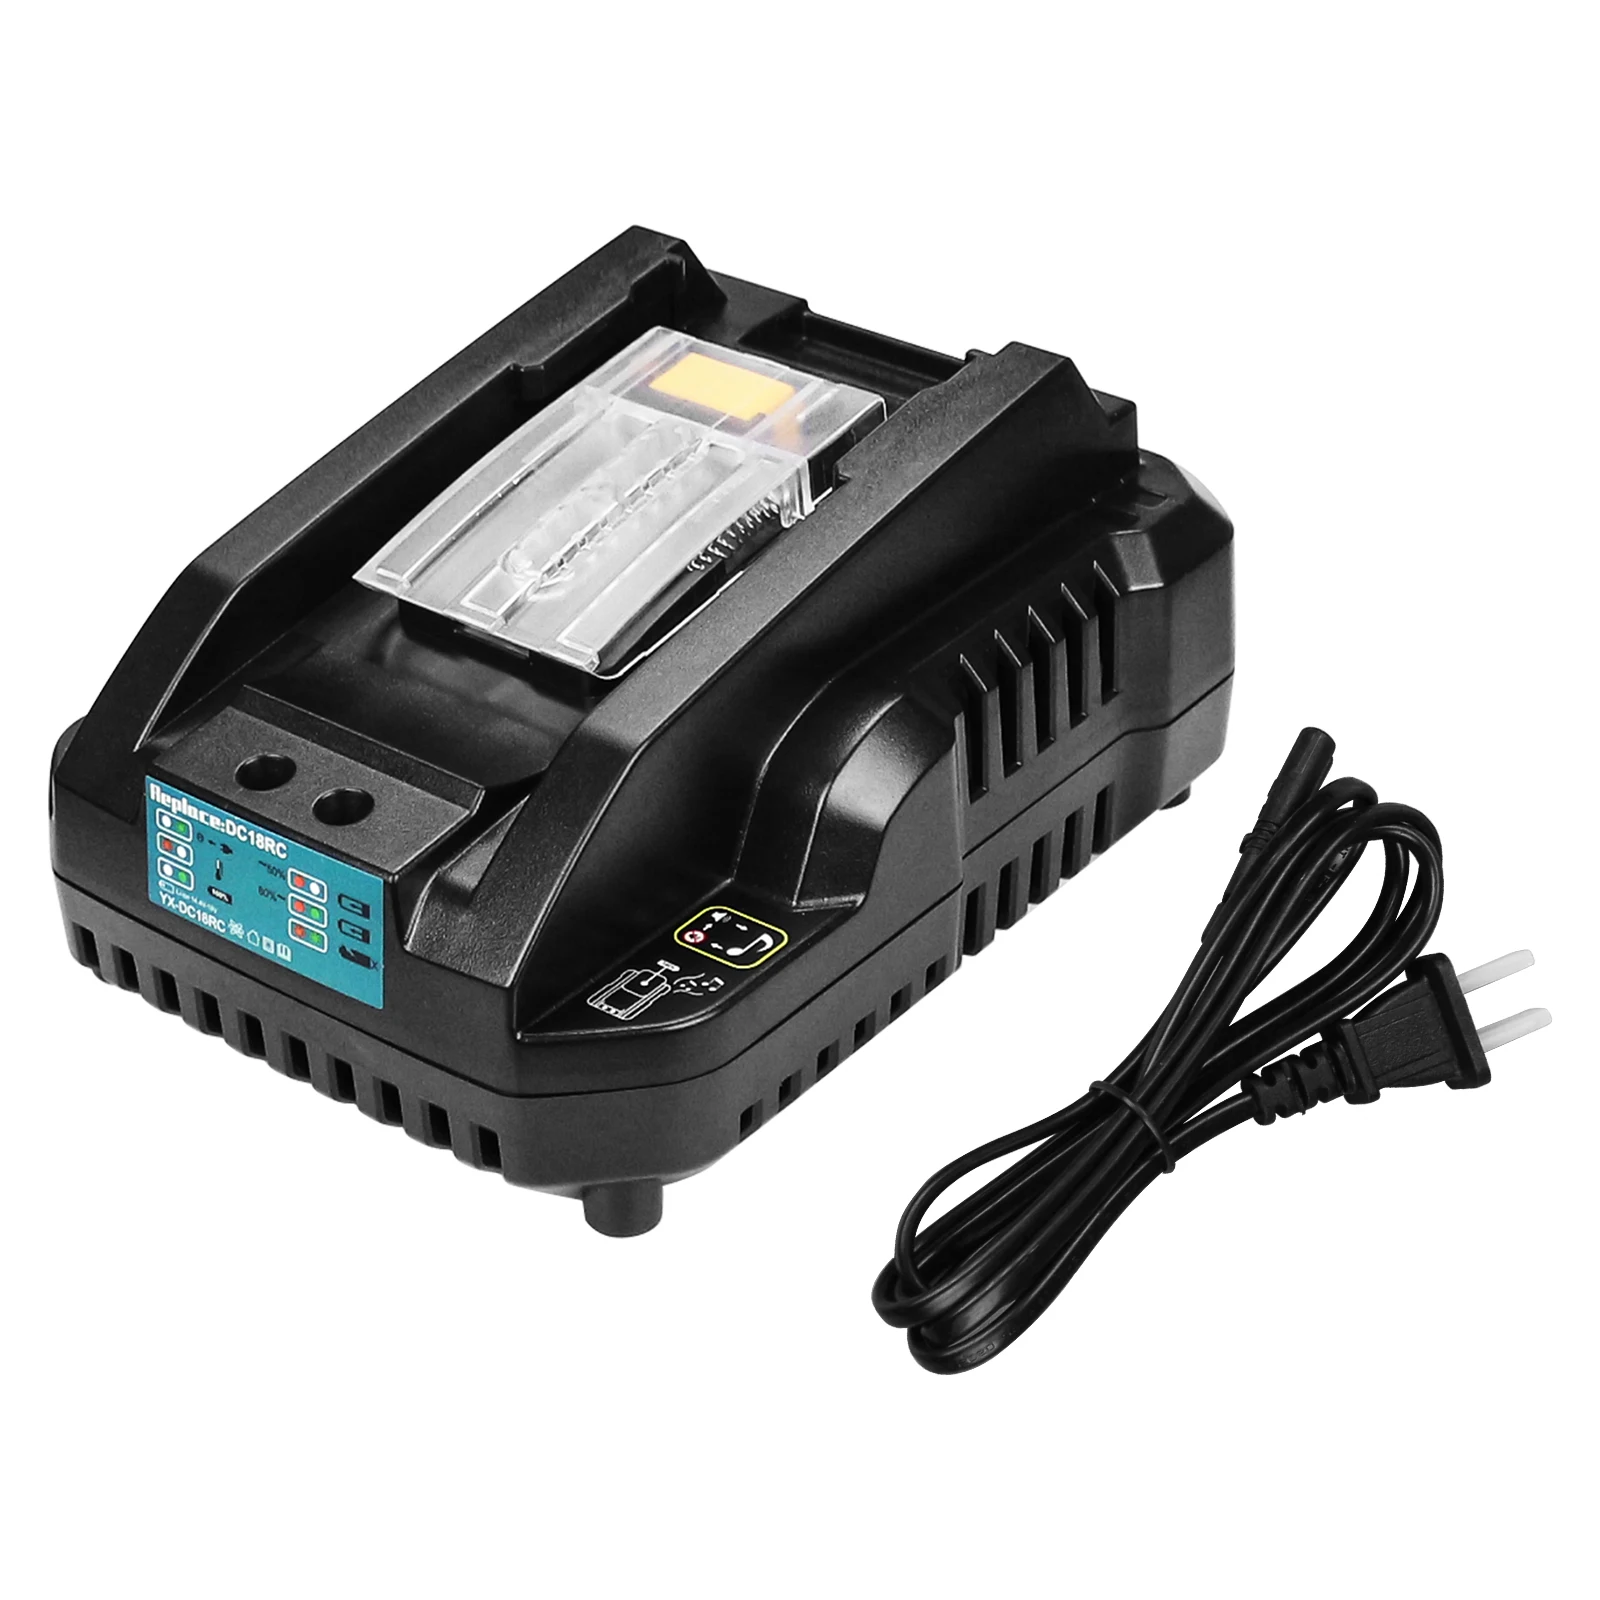 

Mini DC18RC 14.4V 18V lithium ion battery charger 3A current, SMakitas BL1830 BL1430 DC18RC DC18RA electric Power tool, Black/oem